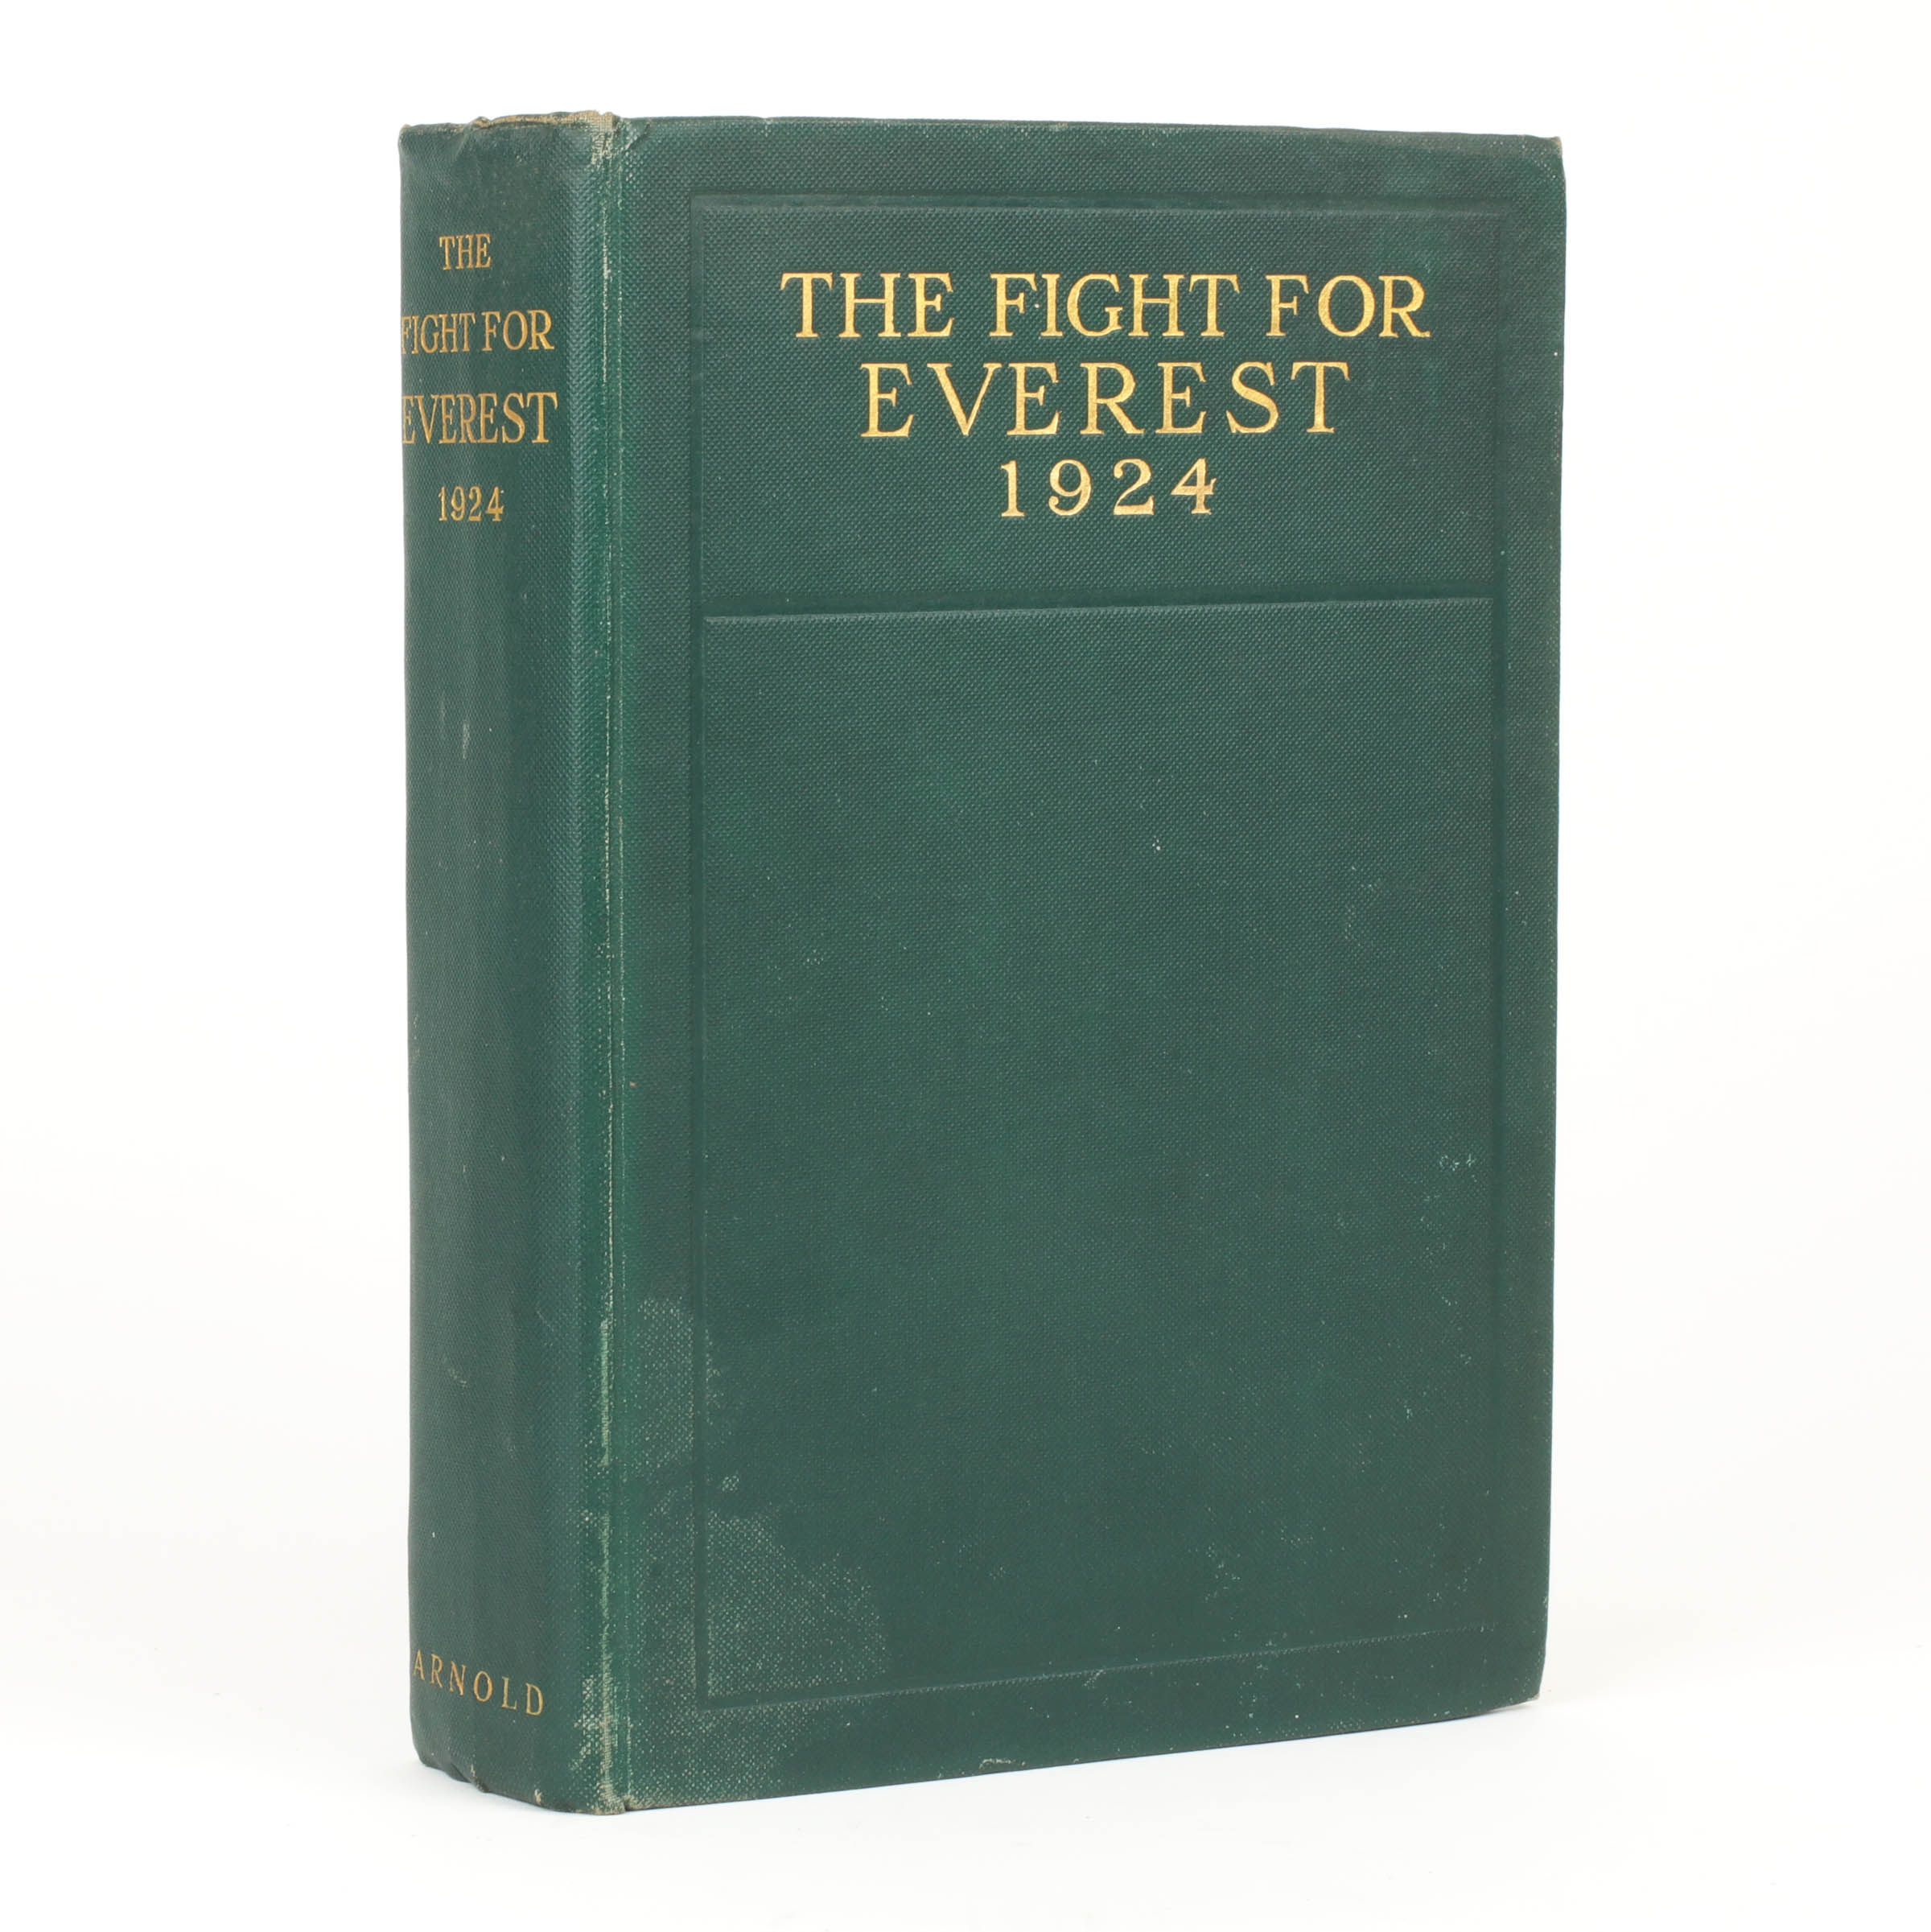 The Everest Collection by [MOUNT EVEREST] - Jonkers Rare Books